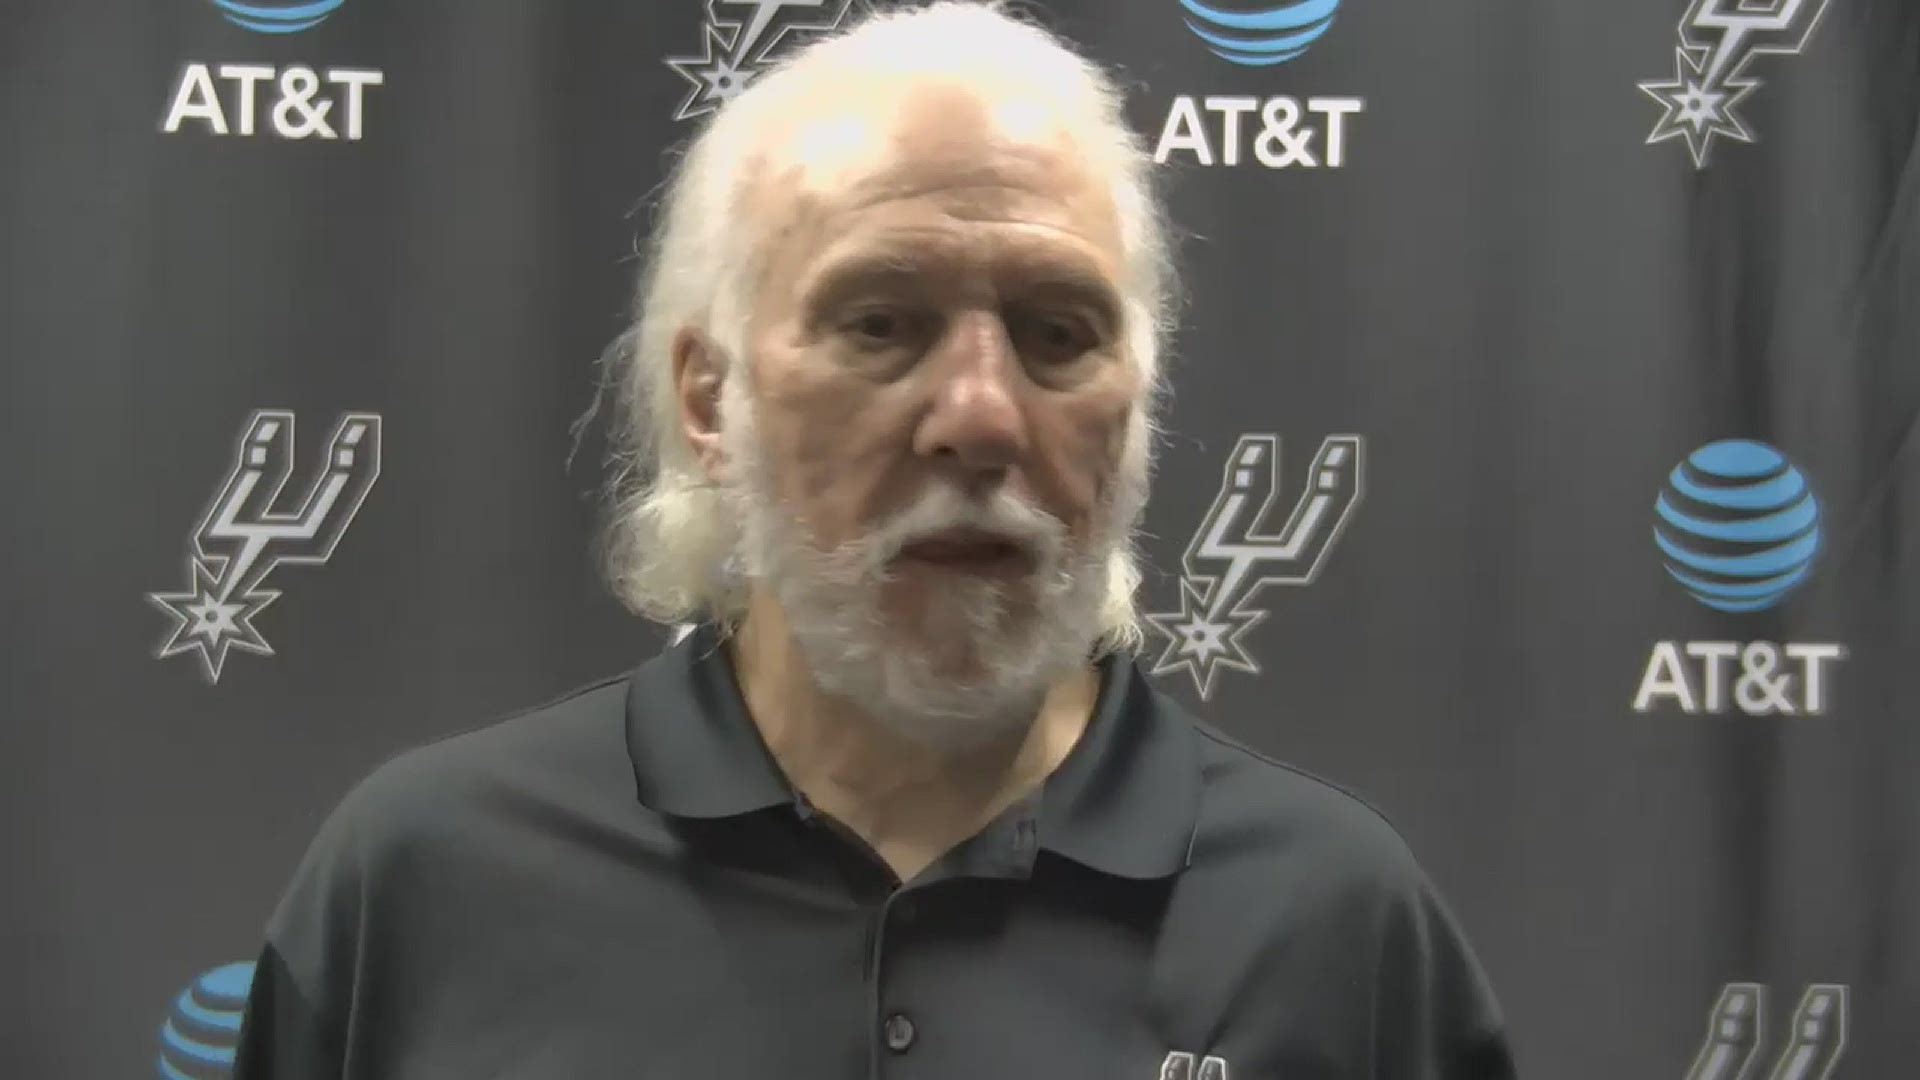 Coach Pop said that the injuries and coronavirus challenges caught up with them in this one, but said his team has done a tremendous job in tough circumstances.